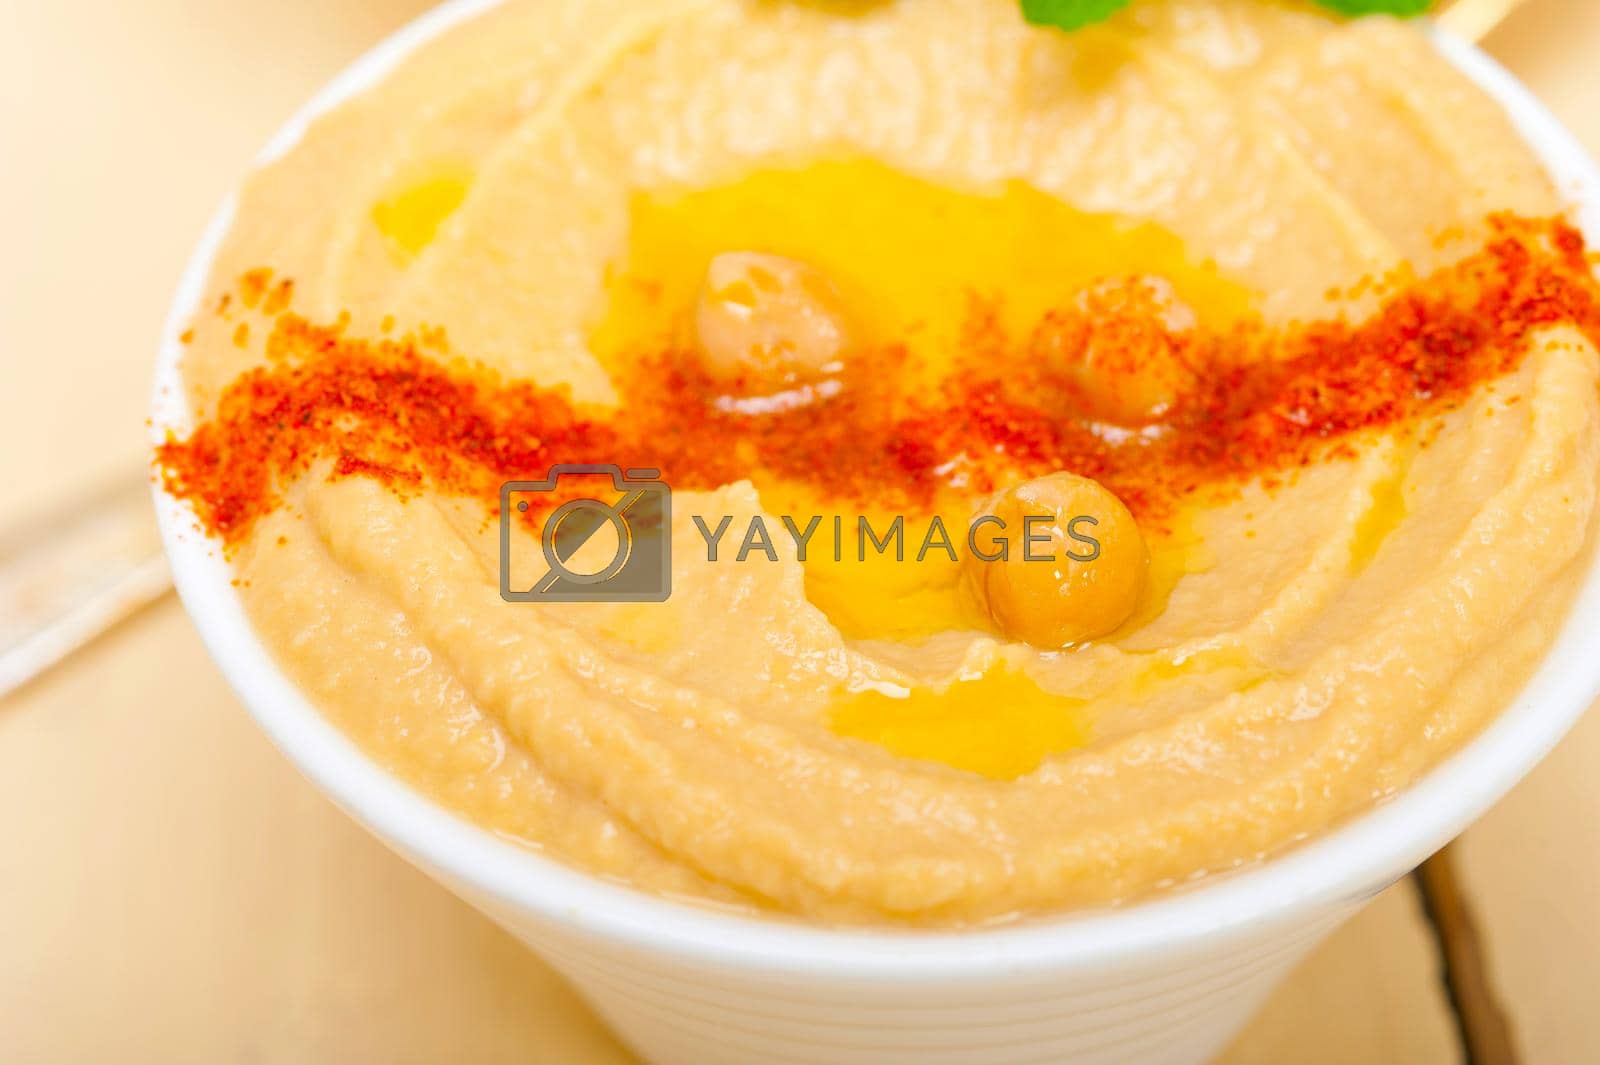 Royalty free image of Hummus with mint on top by keko64